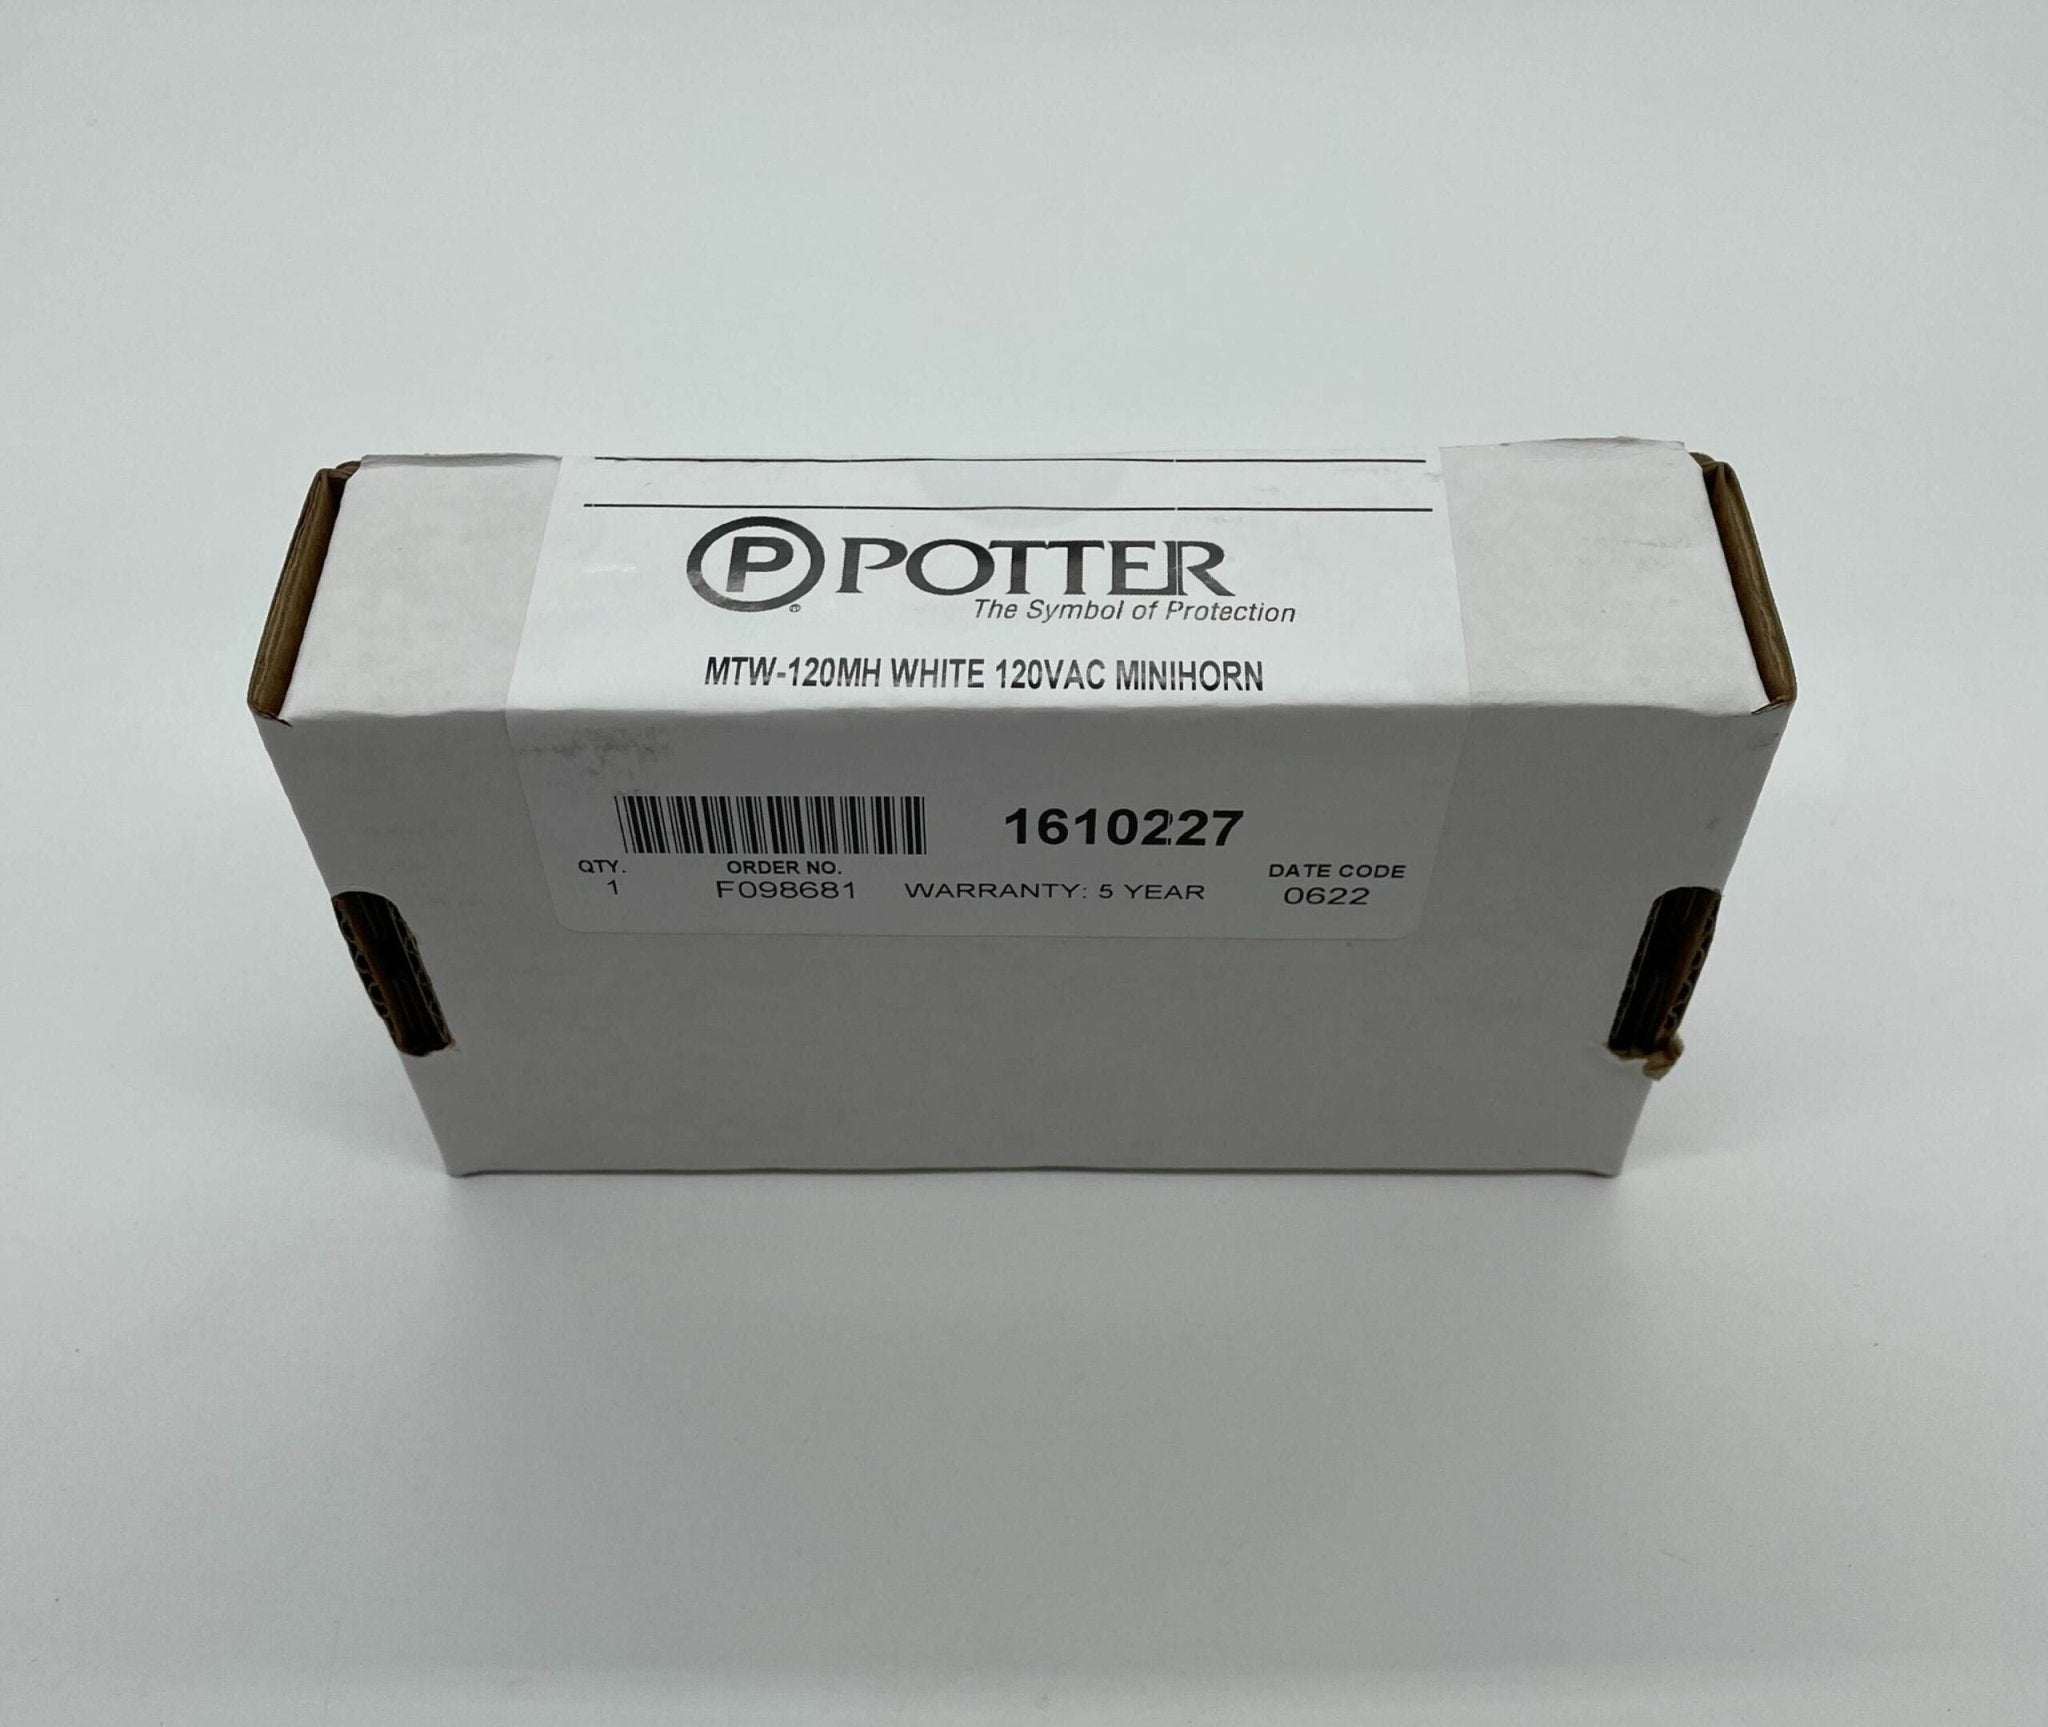 Potter MTW-120MH - The Fire Alarm Supplier